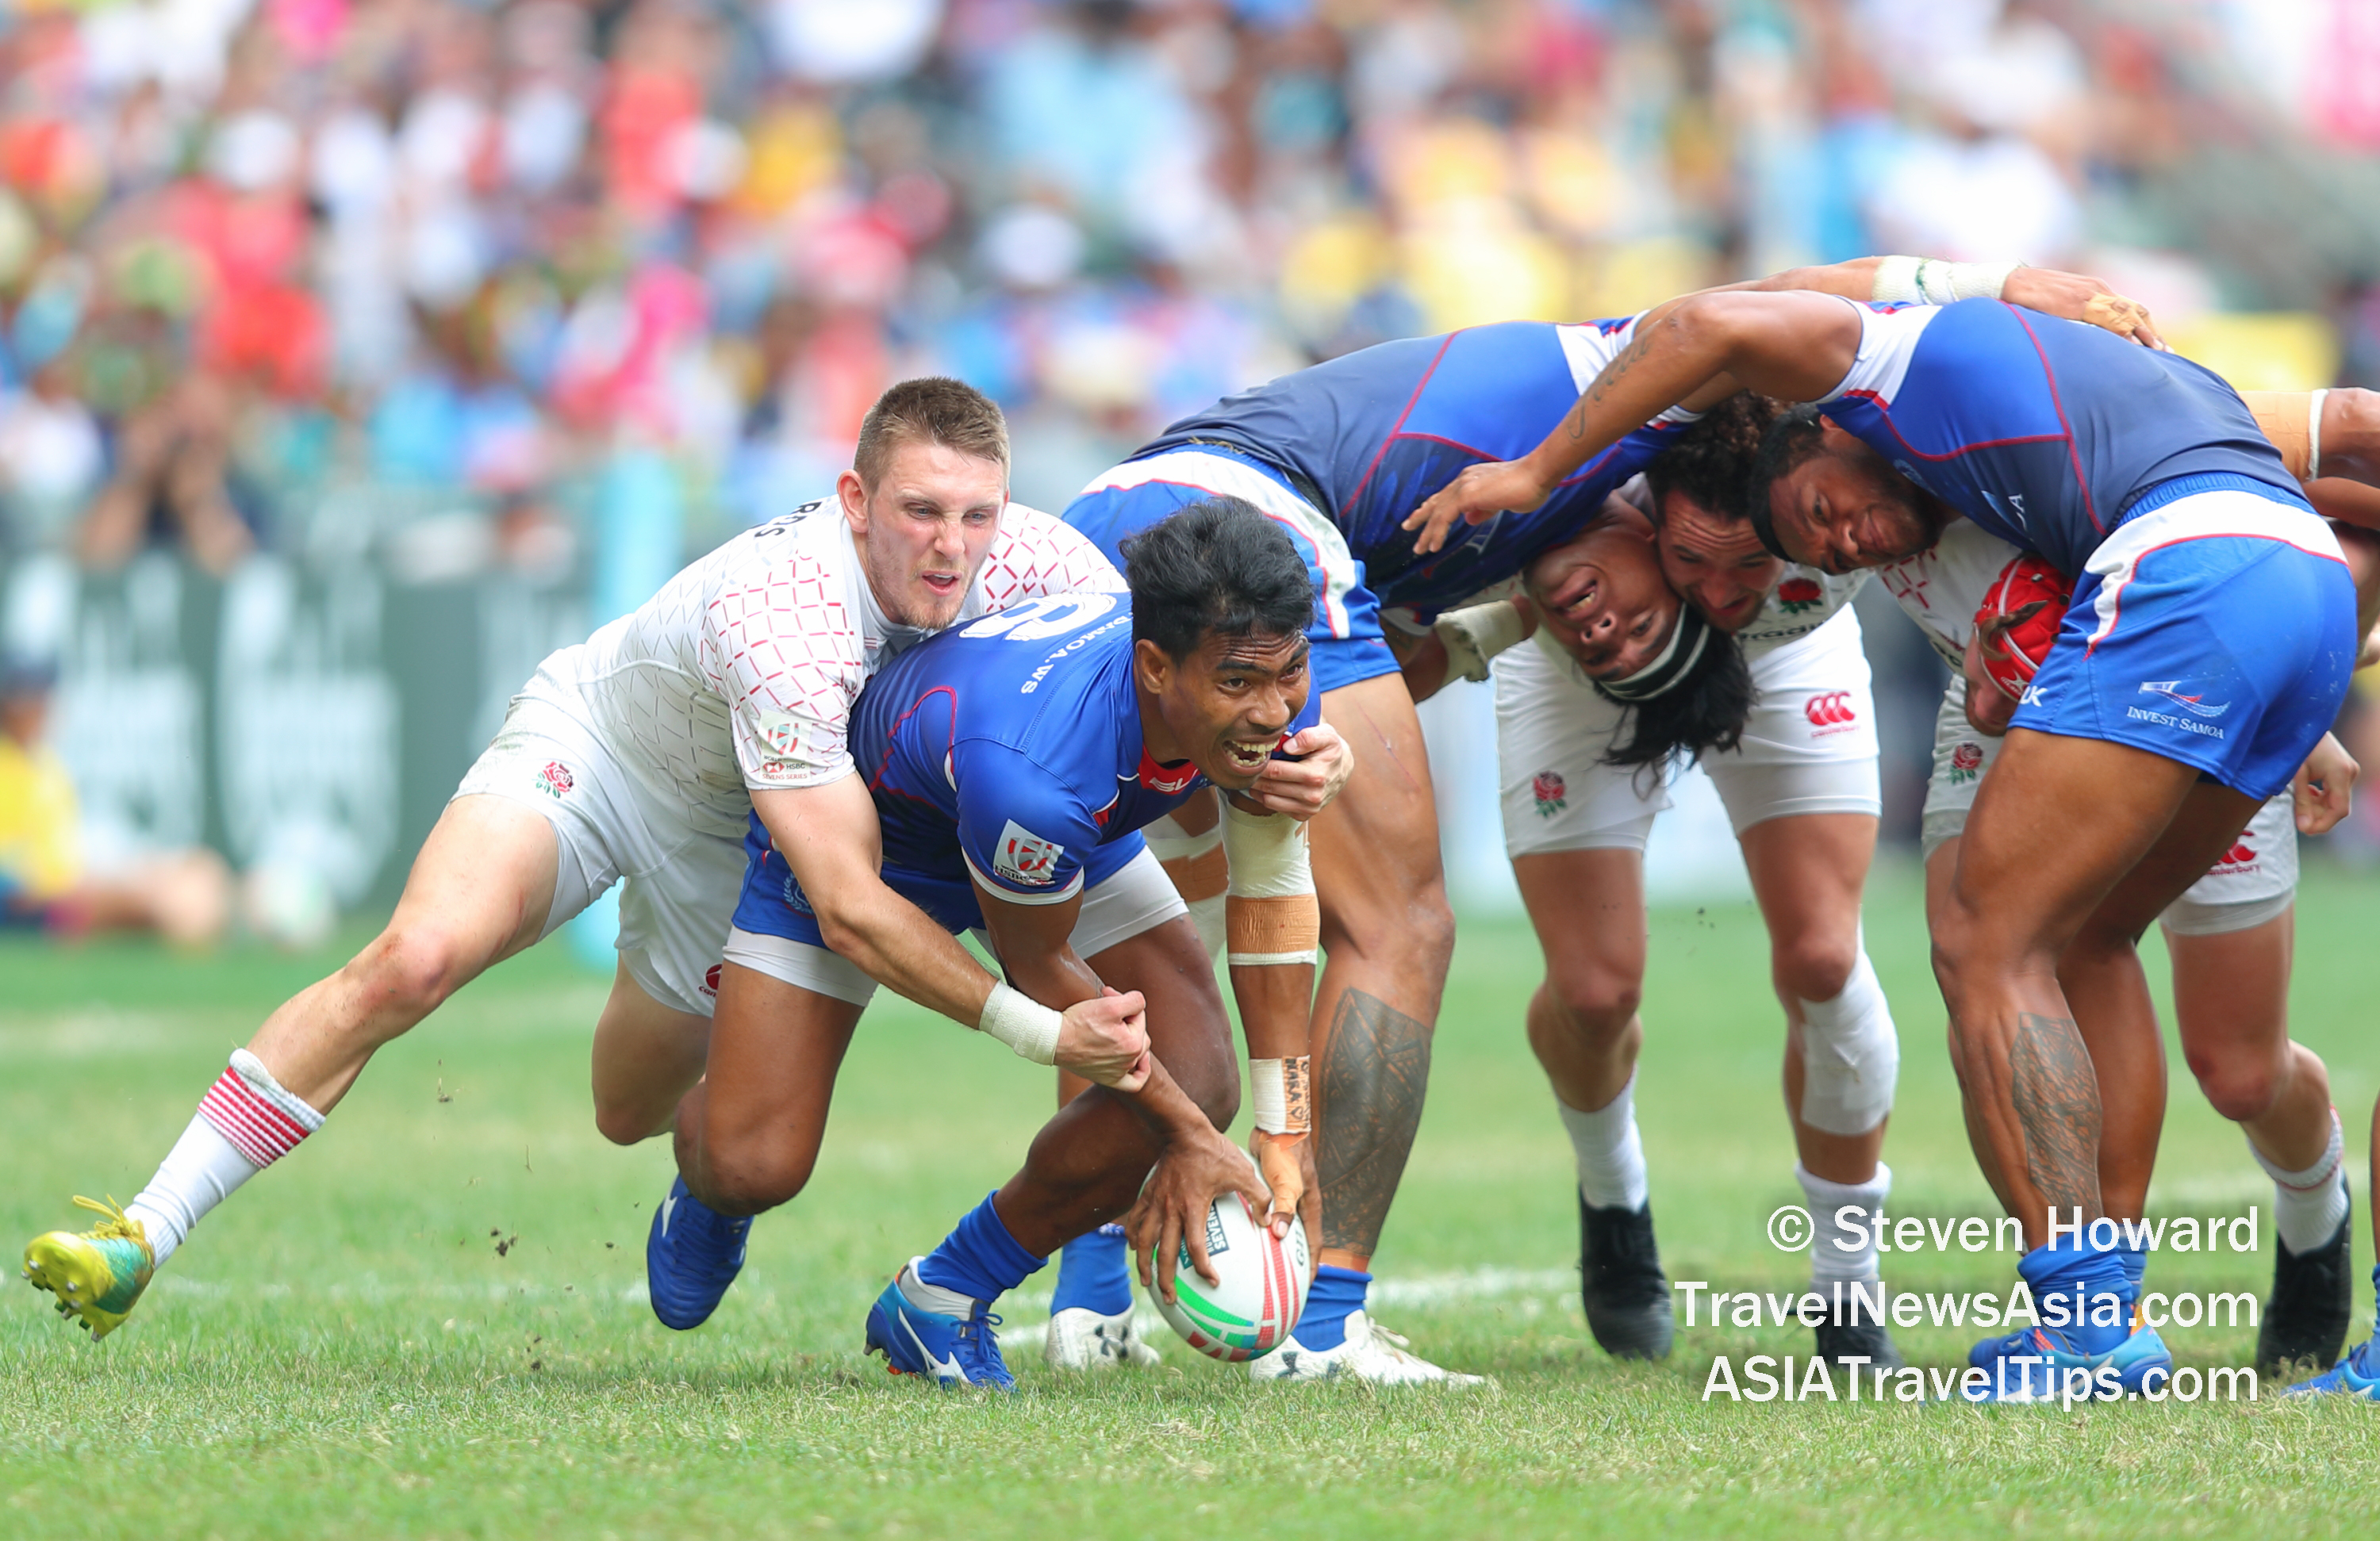 England in action against Samoa at the Cathay Pacific / HSBC World Rugby Hong Kong Sevens 2019. Picture by Steven Howard of TravelNewsAsia.com Click to enlarge.